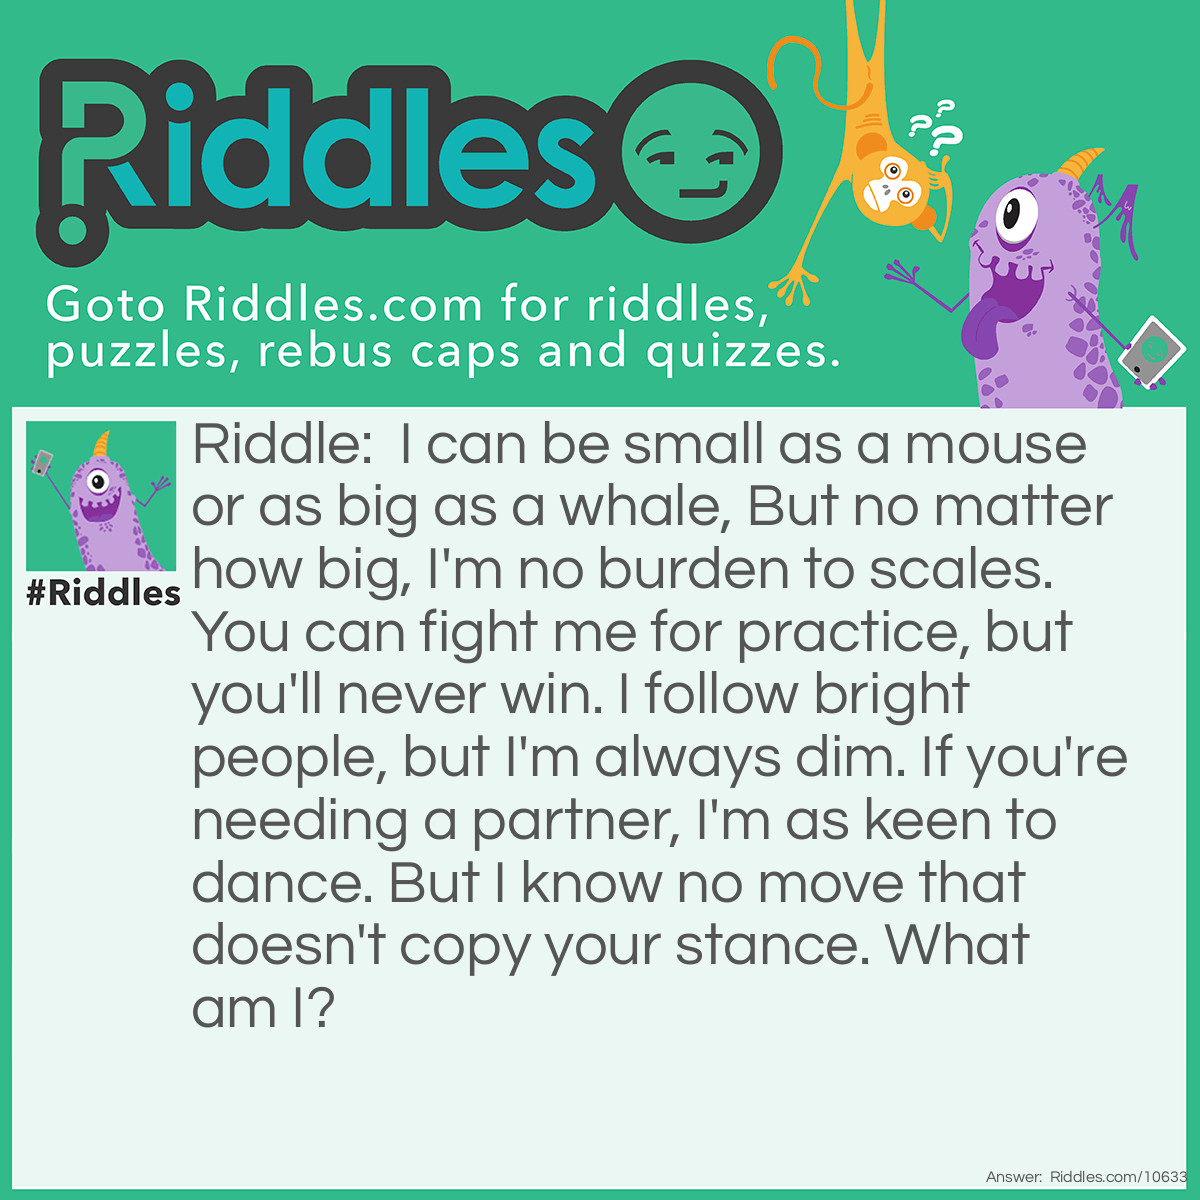 Riddle: I can be small as a mouse or as big as a whale, But no matter how big, I'm no burden to scales. You can fight me for practice, but you'll never win. I follow bright people, but I'm always dim. If you're needing a partner, I'm as keen to dance. But I know no move that doesn't copy your stance. What am I? Answer: A shadow.